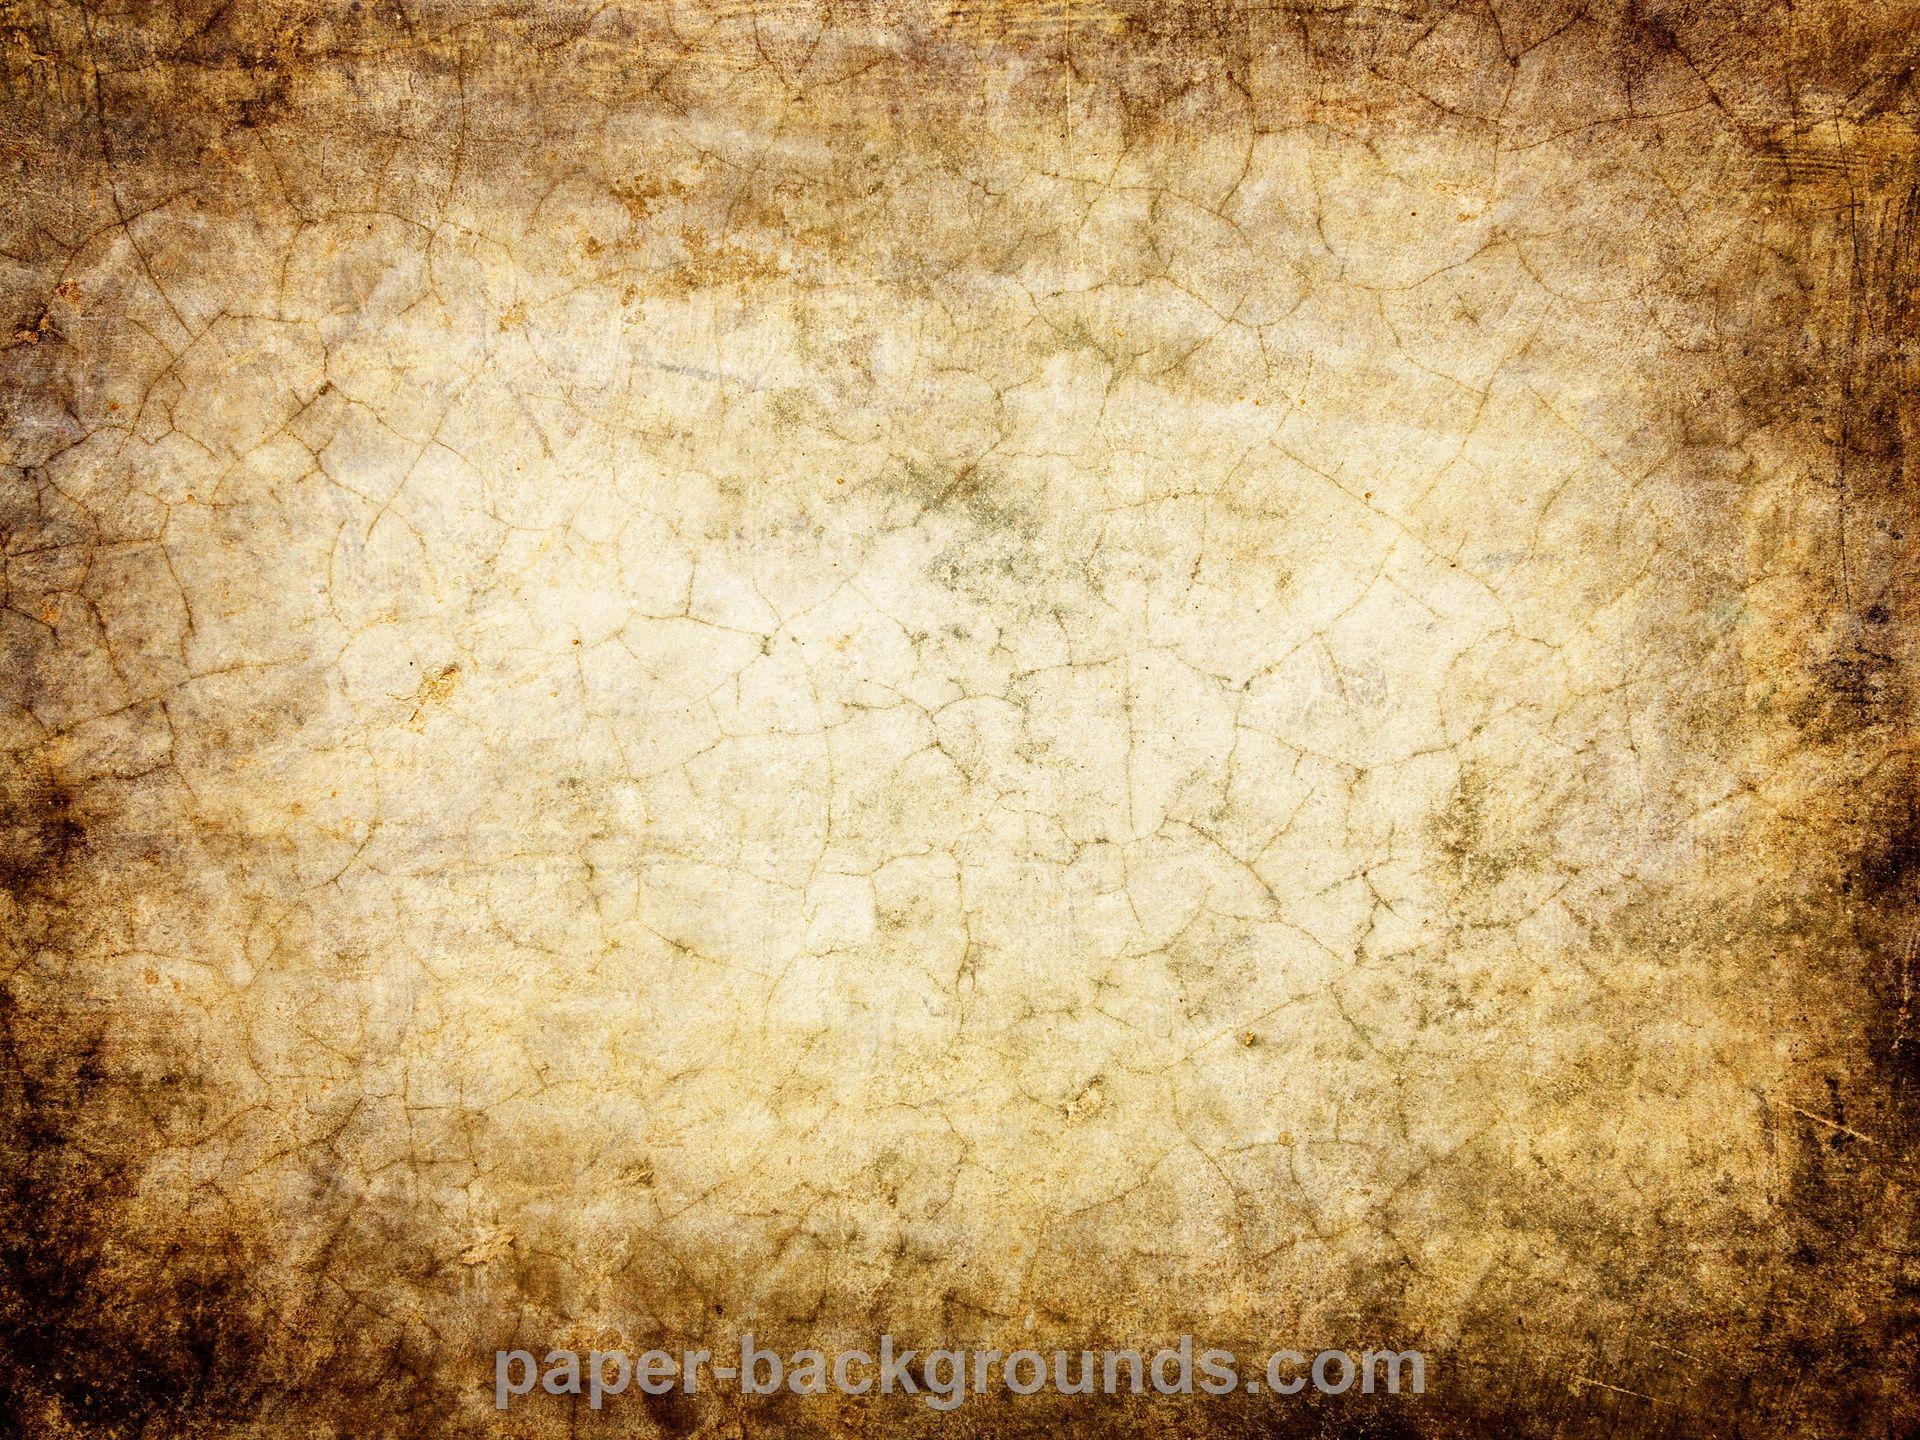 here is a free old brown parchment paper texture